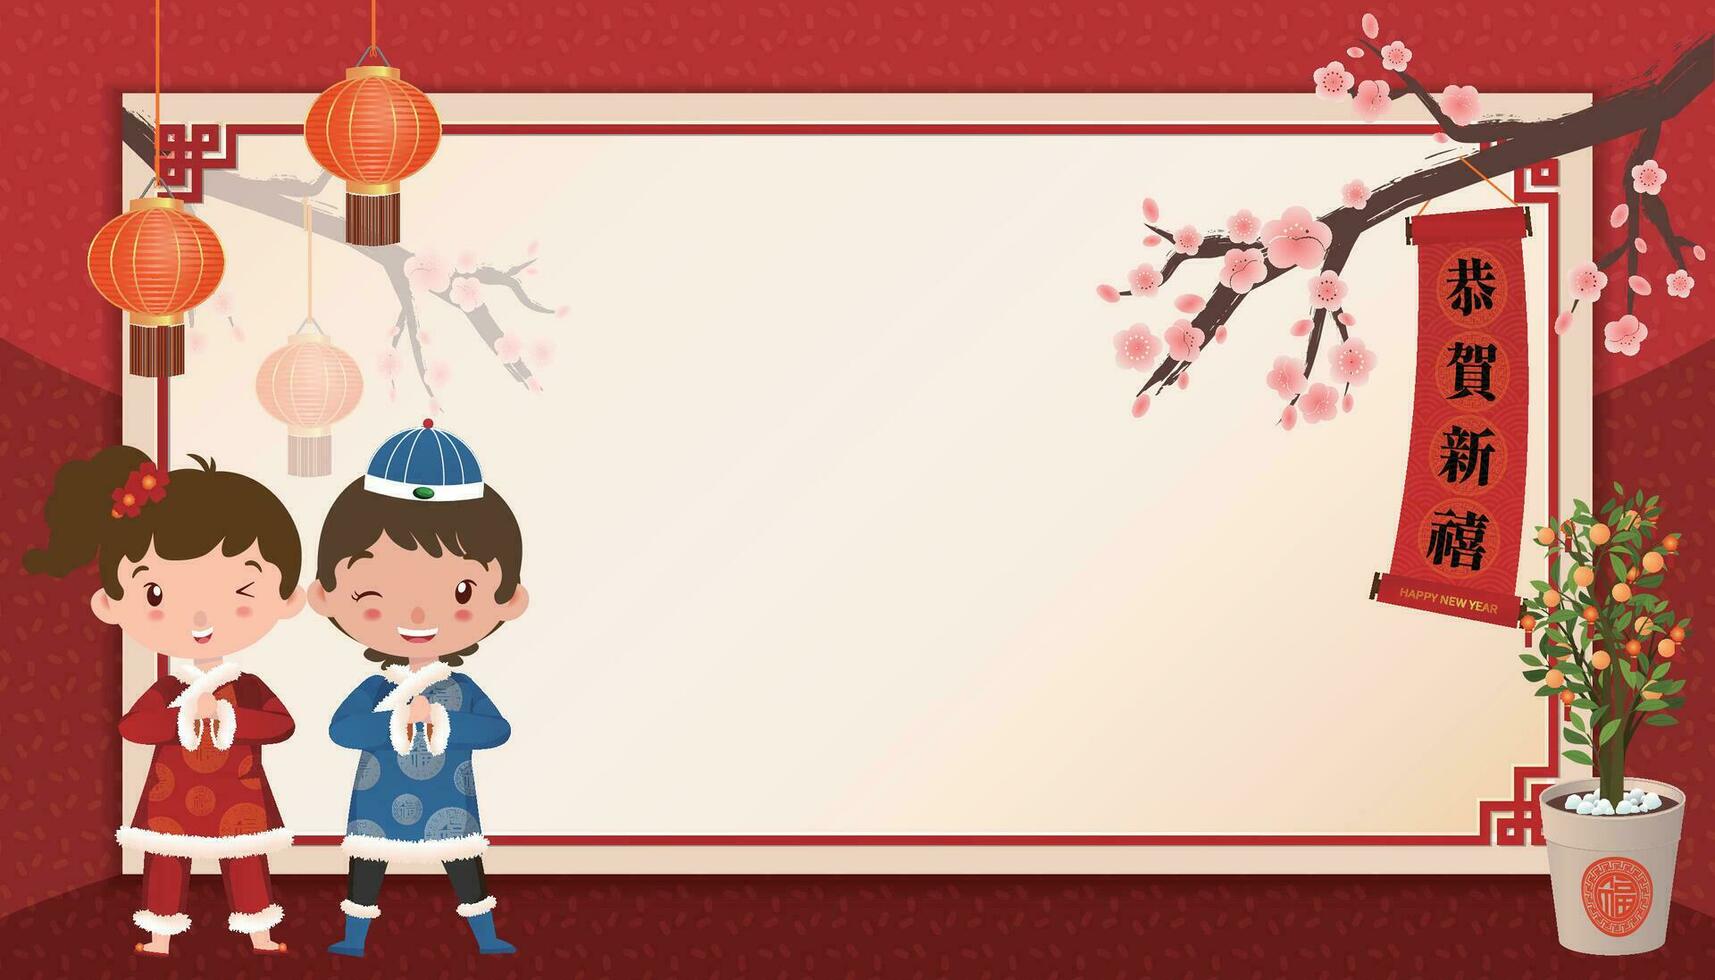 Happy New Year frame, people paying New Year greetings, with lanterns in the background, with plum blossoms and oranges, Chinese text for Happy New Year vector